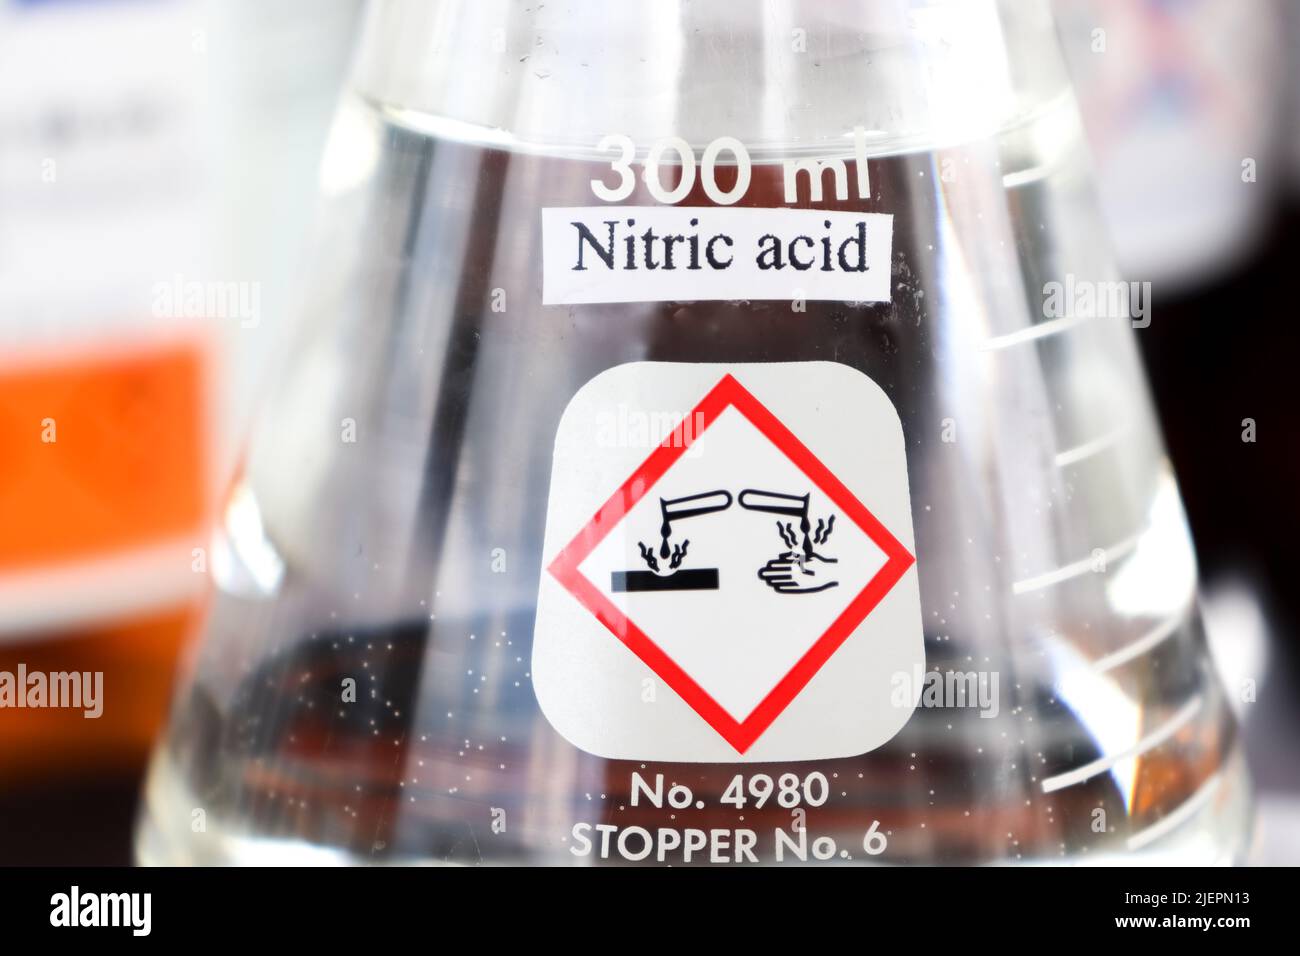 Nitric acid in glass, chemical in the laboratory and industry Stock Photo